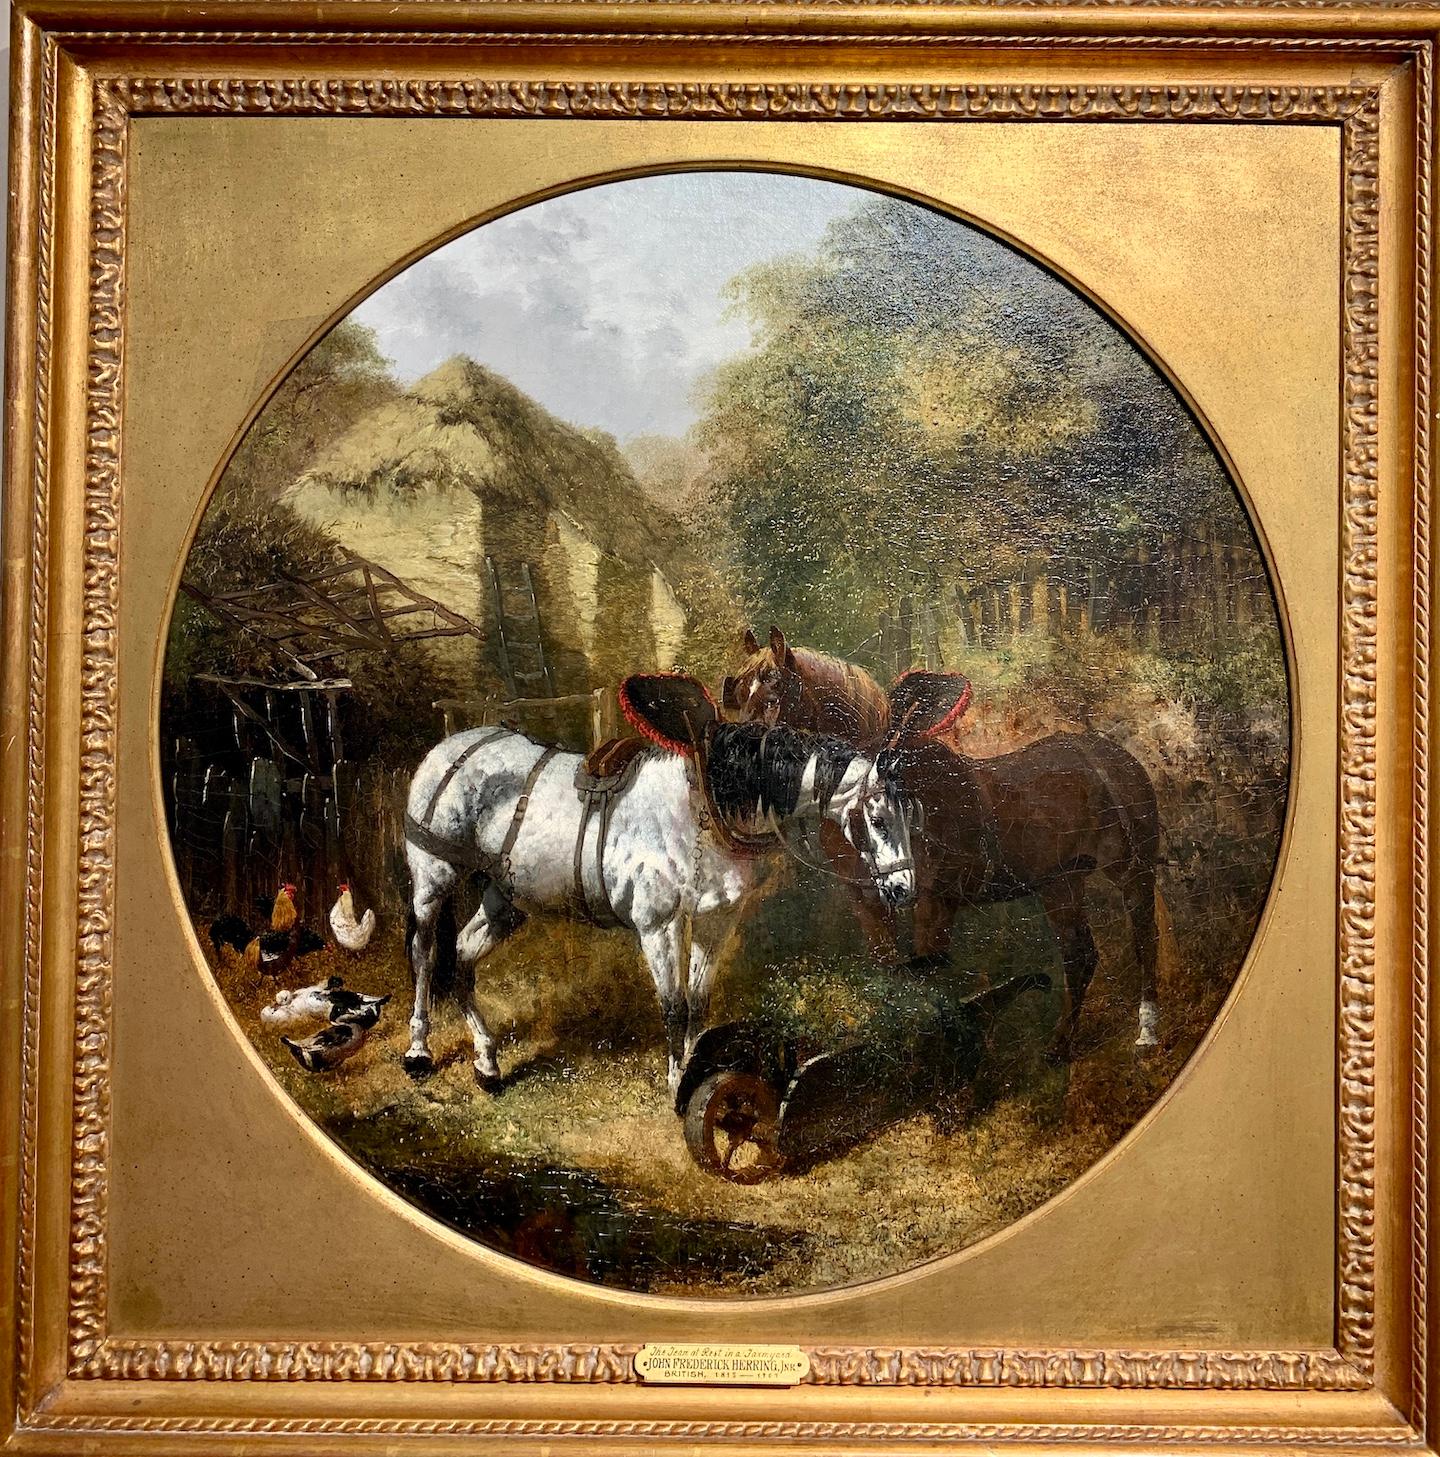 John Frederick Herring Jr. Landscape Painting - Antique 19th century English, Cart Horses in a farmyard landscape with cottage.